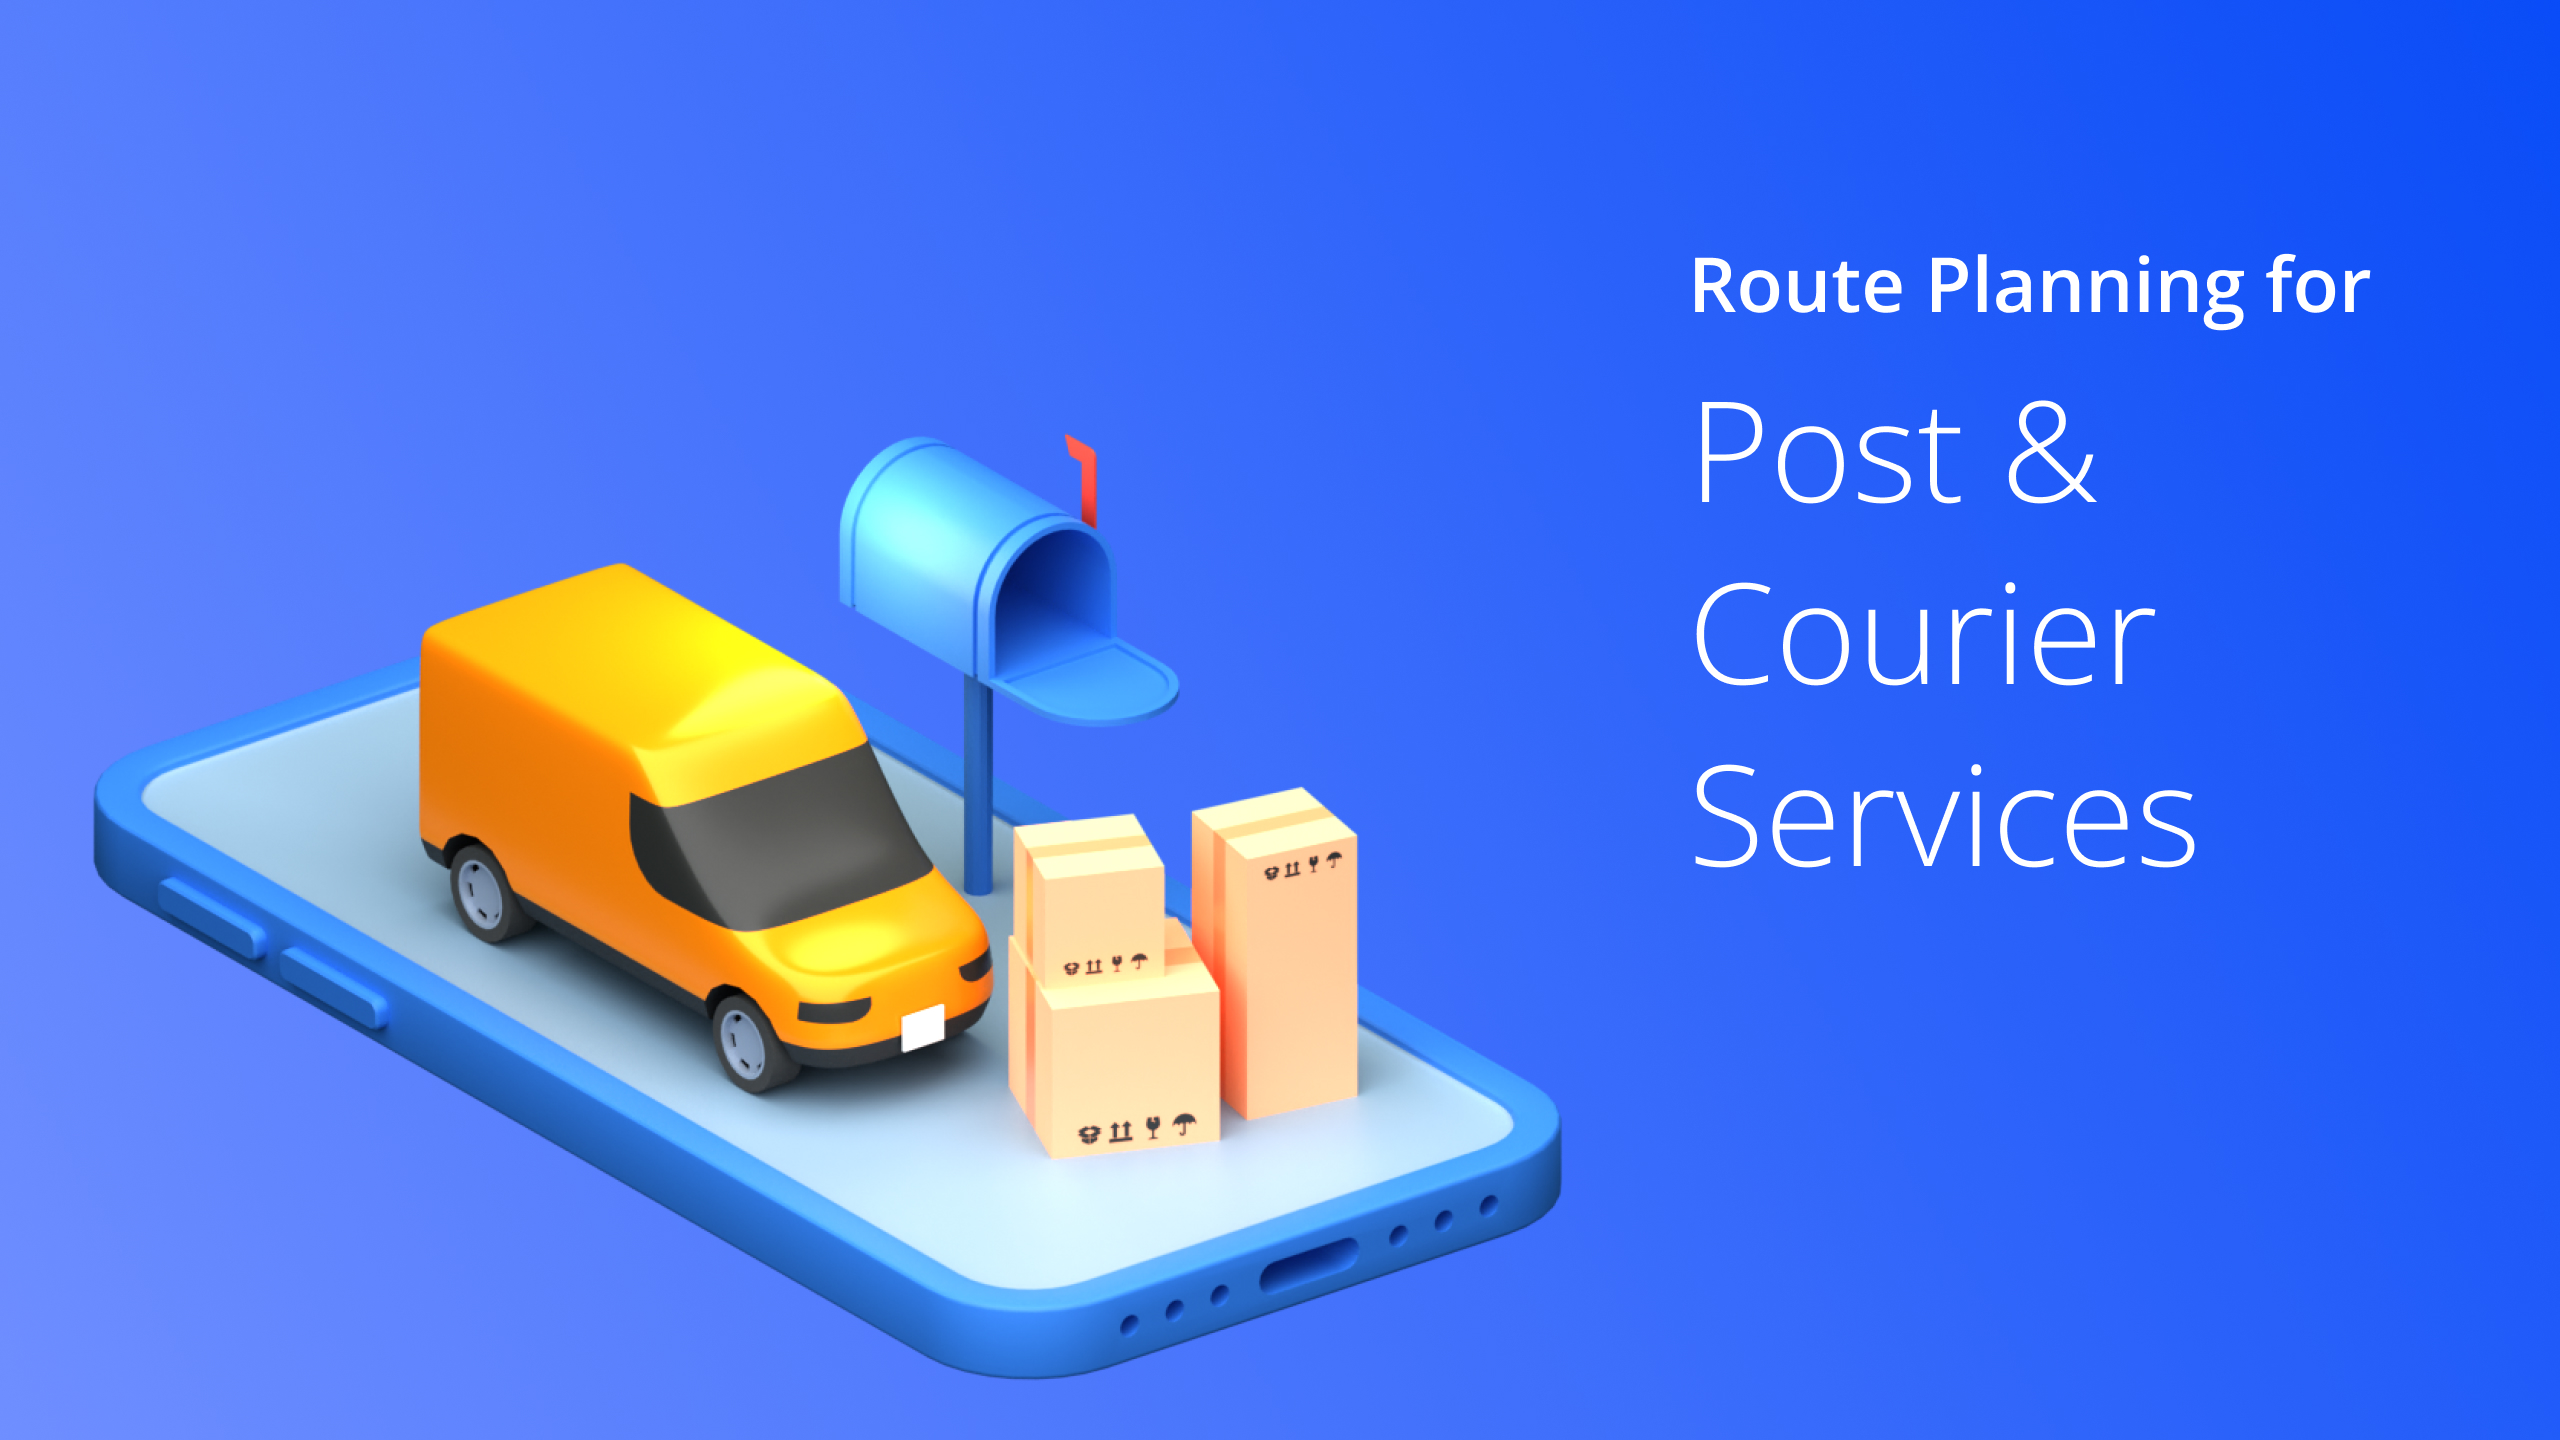 Custom Image - Route Planning for Post and Courier Services